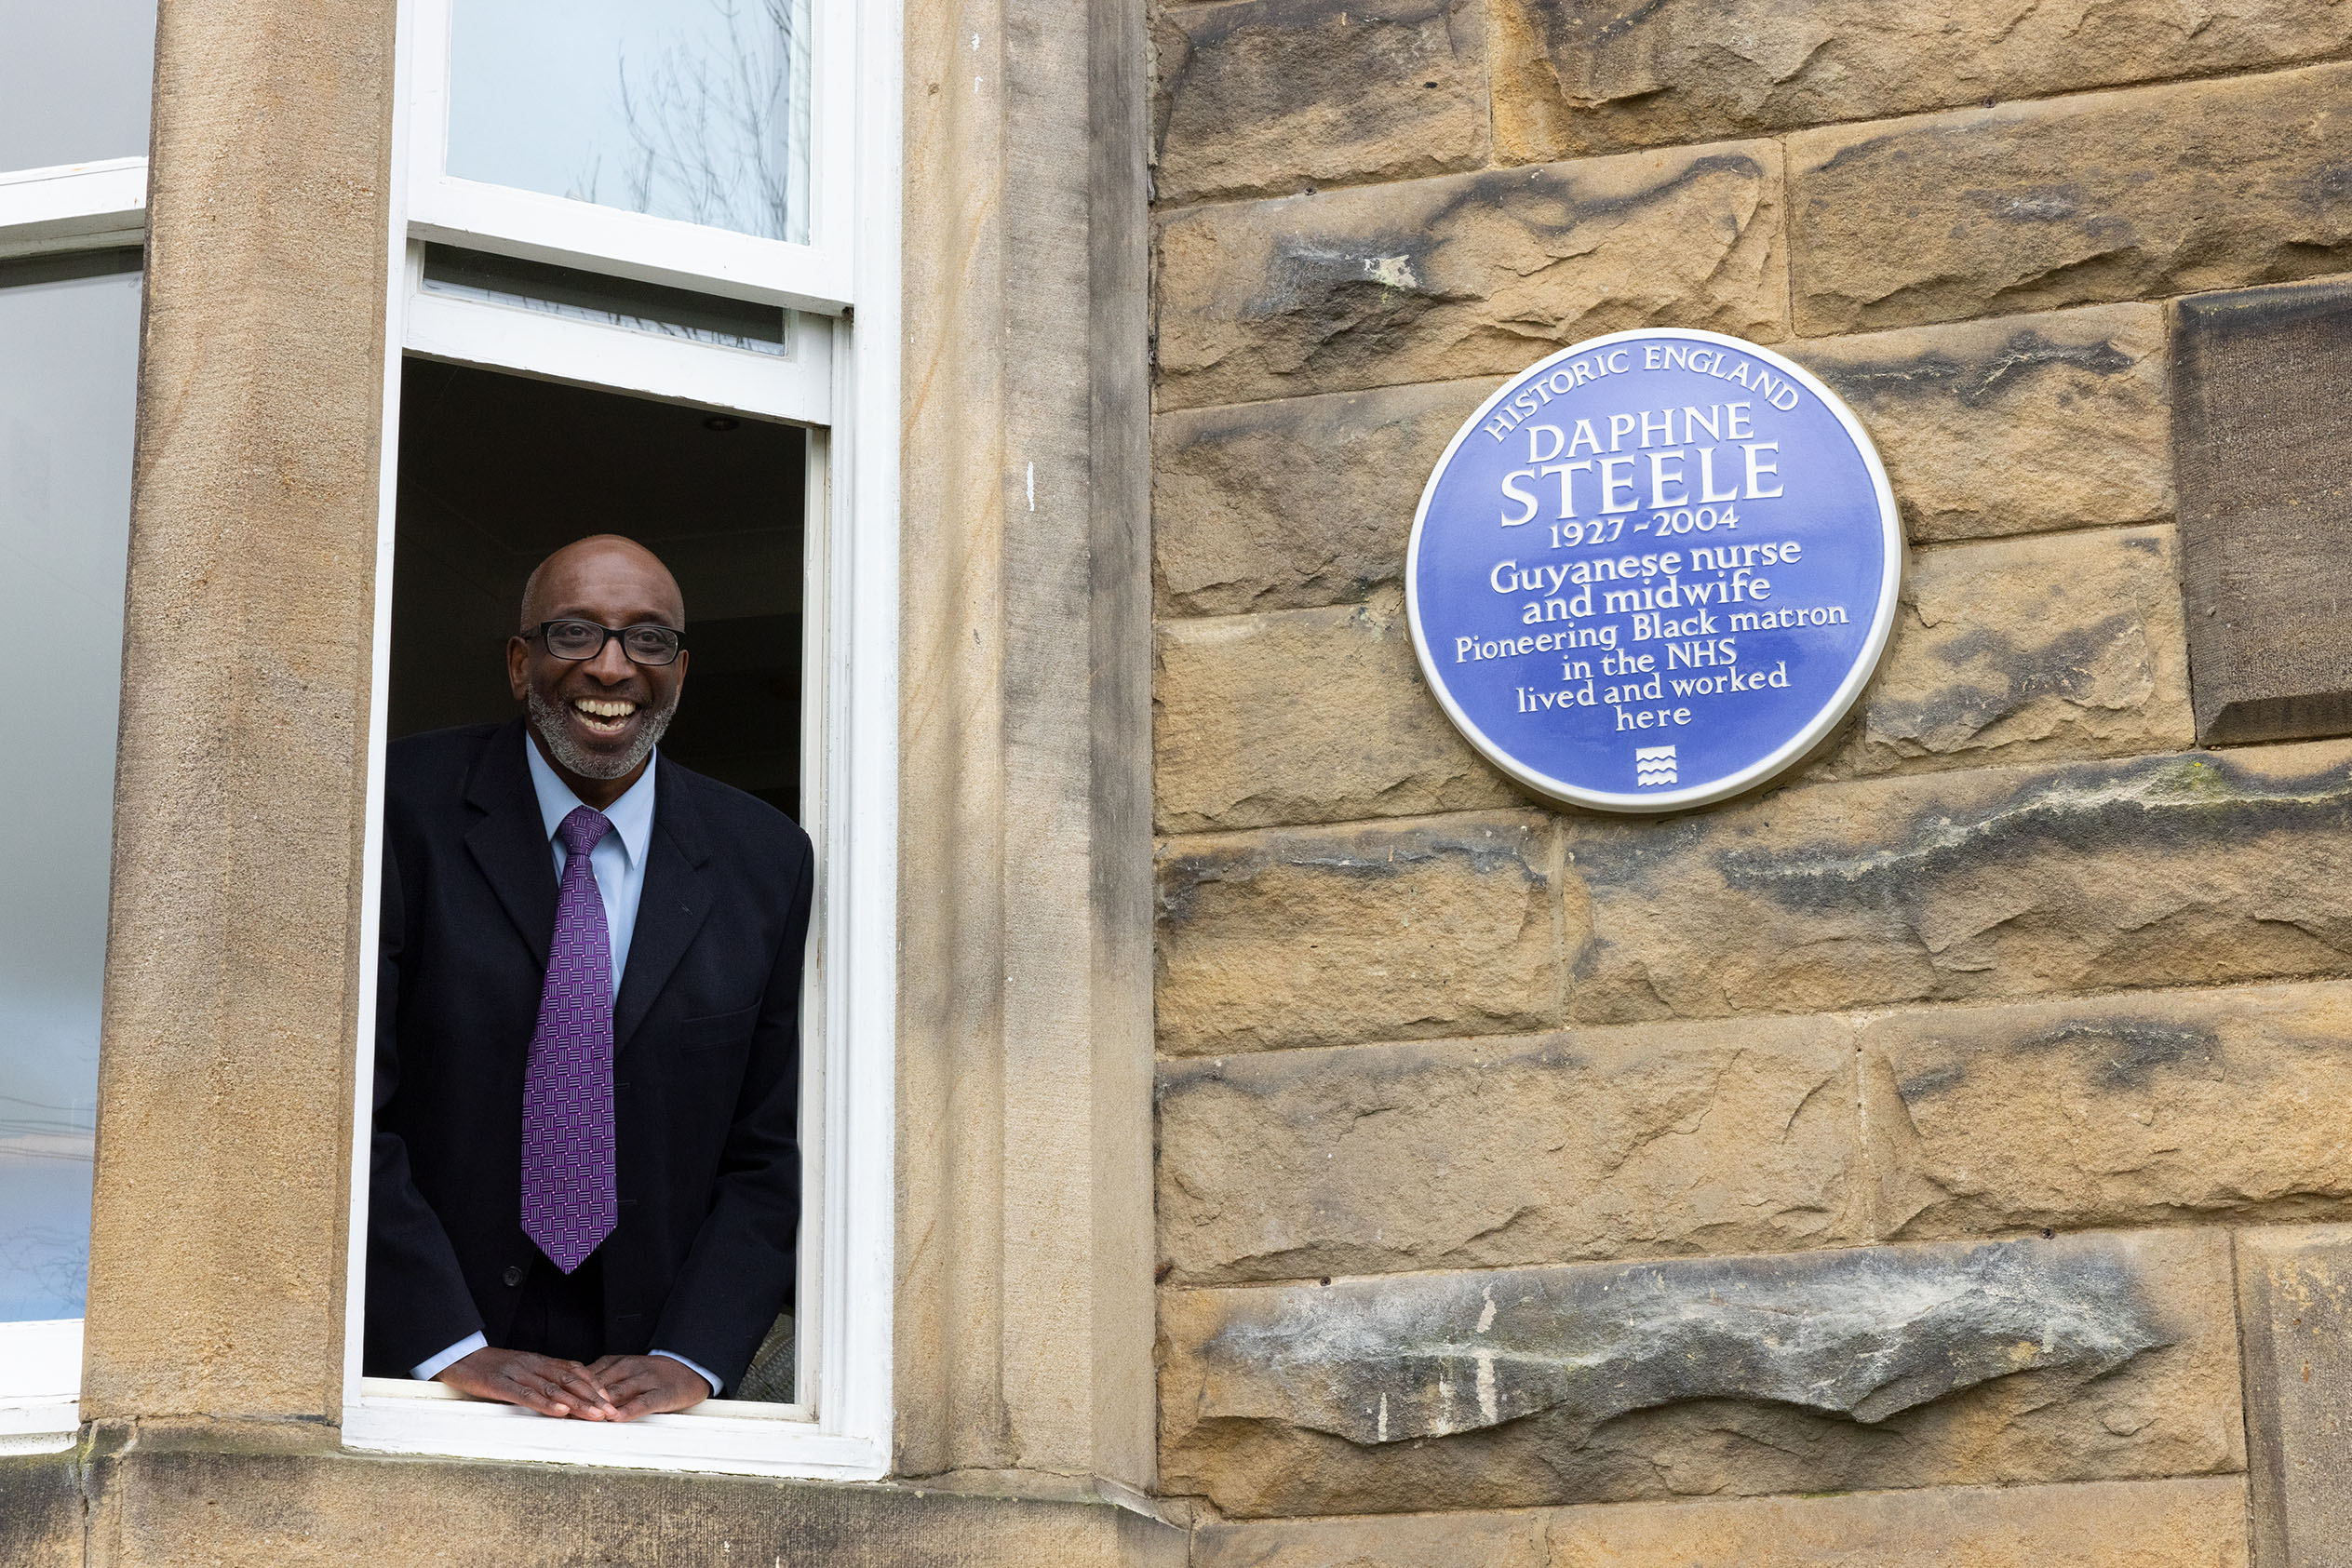 A man in a suit and tie smiling at camera while stood at an open window next to a heritage blue plaque